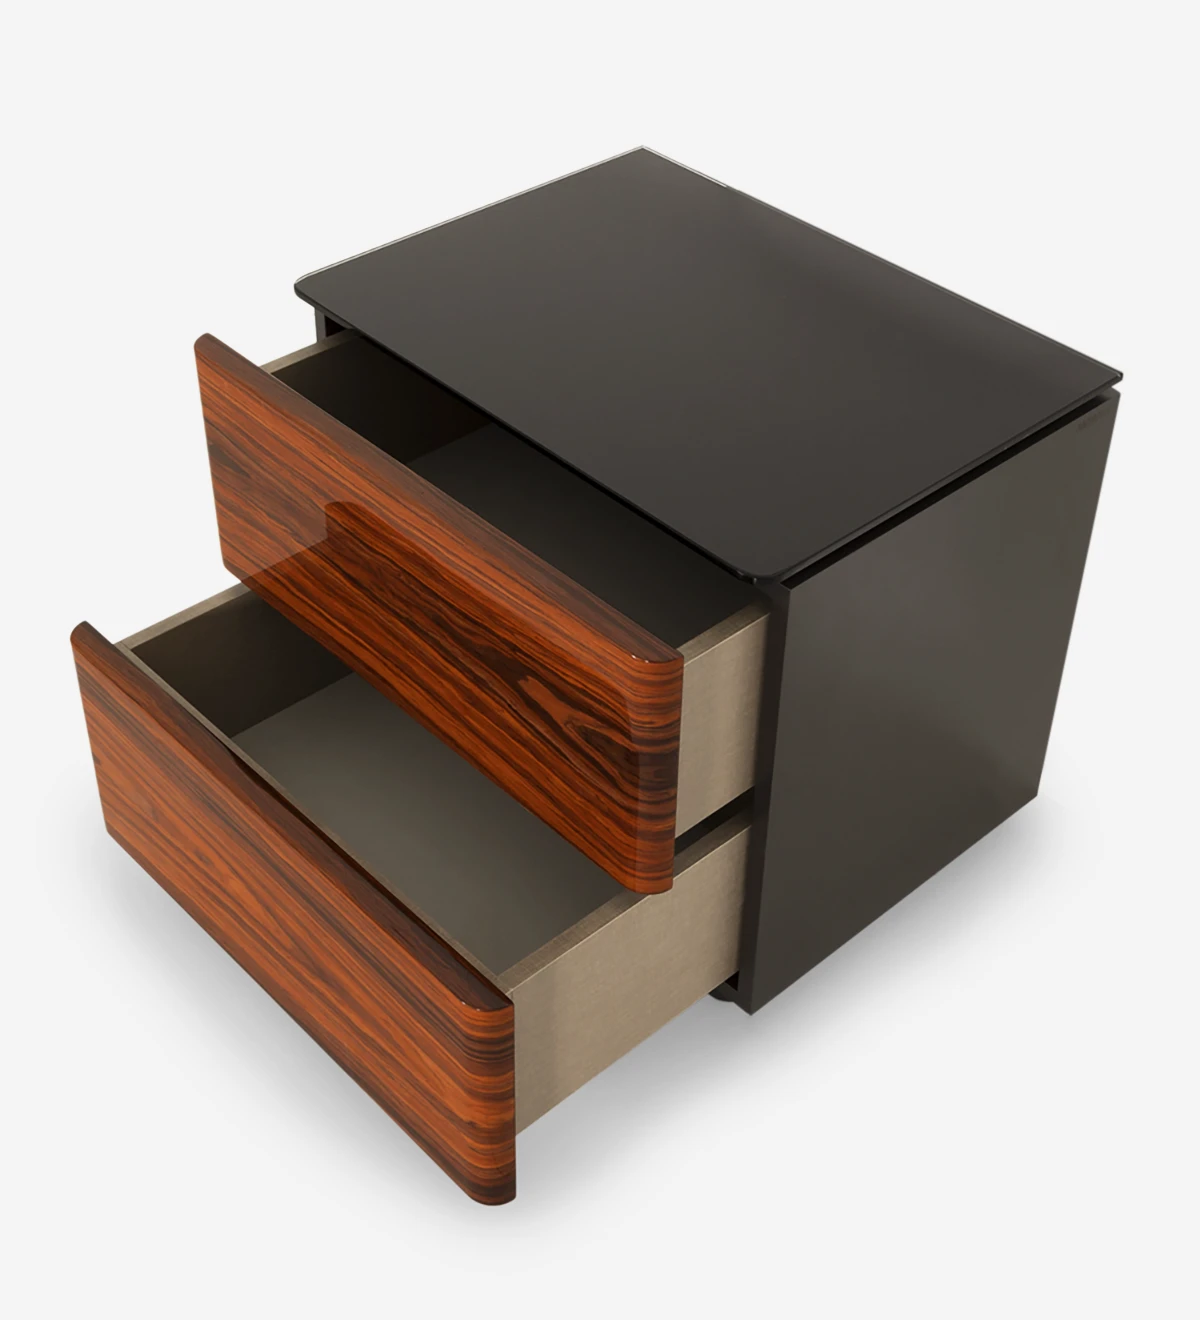 Bedside table with 2 drawers in high gloss palissander, black lacquered frame and black glass top.